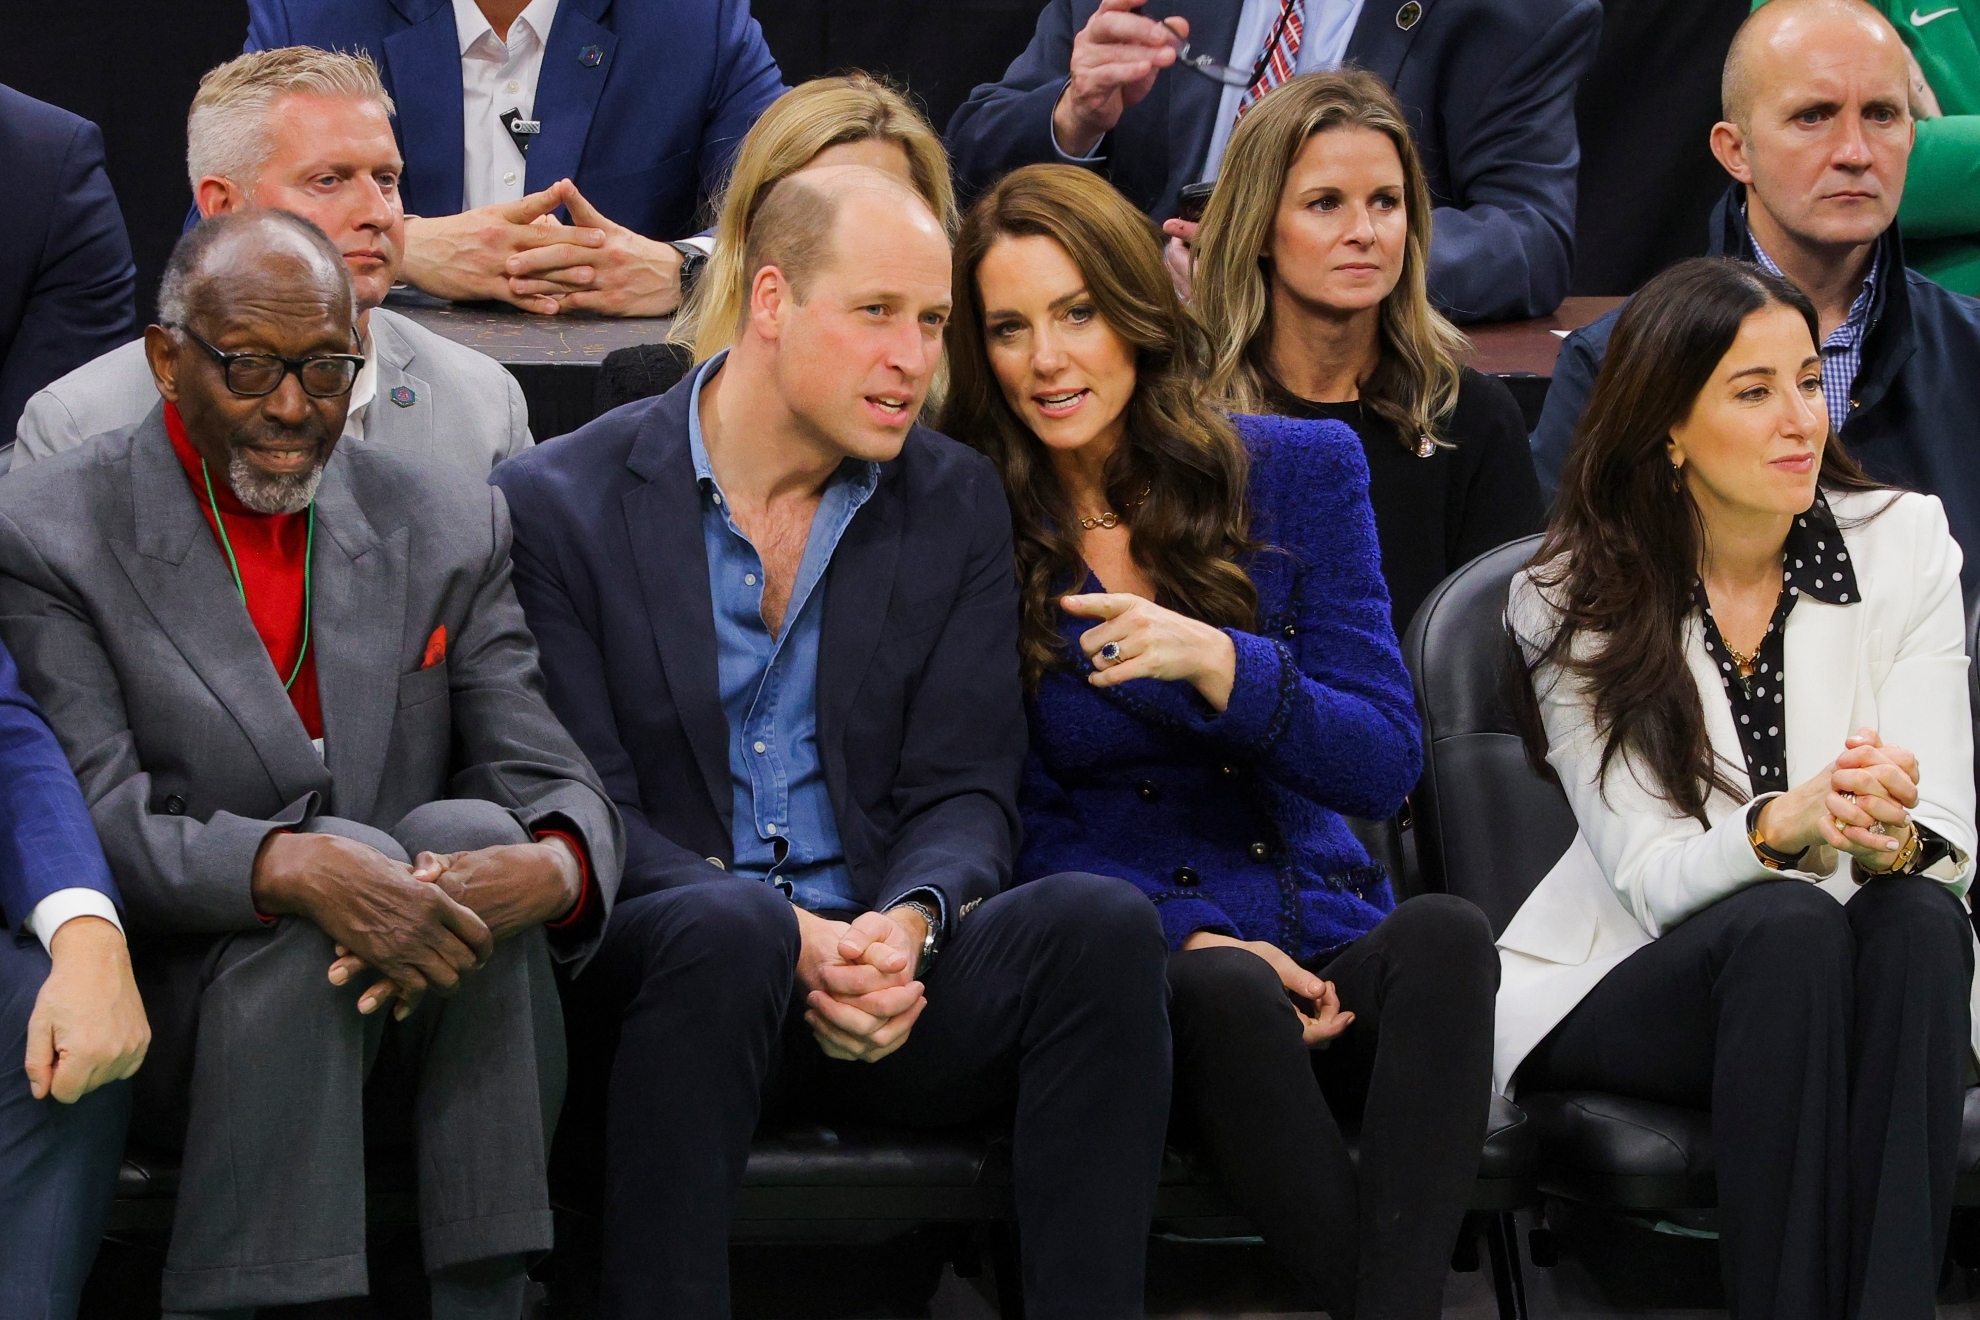 Britain's Prince William, Kate, Princess of Wales watch an NBA basketball game between the Boston Celtics and the Miami Heat in Boston